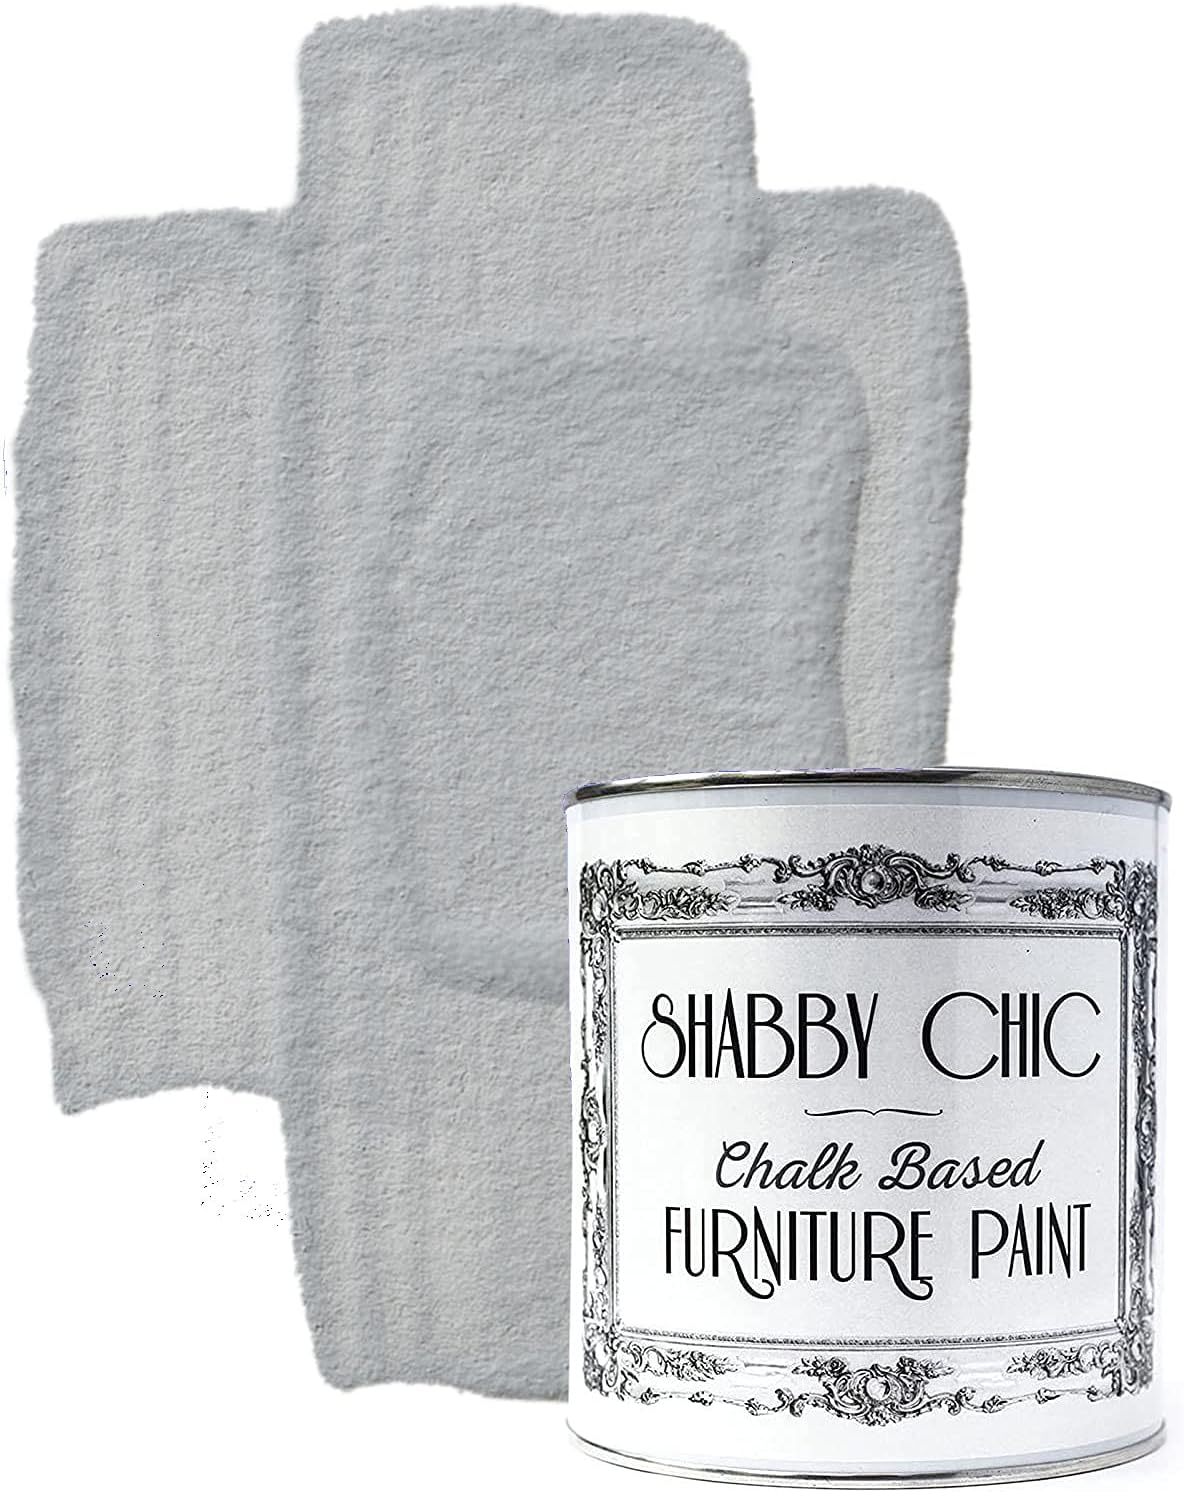 Shabby Chic Chalk Based Furniture Paint: Luxurious [...]